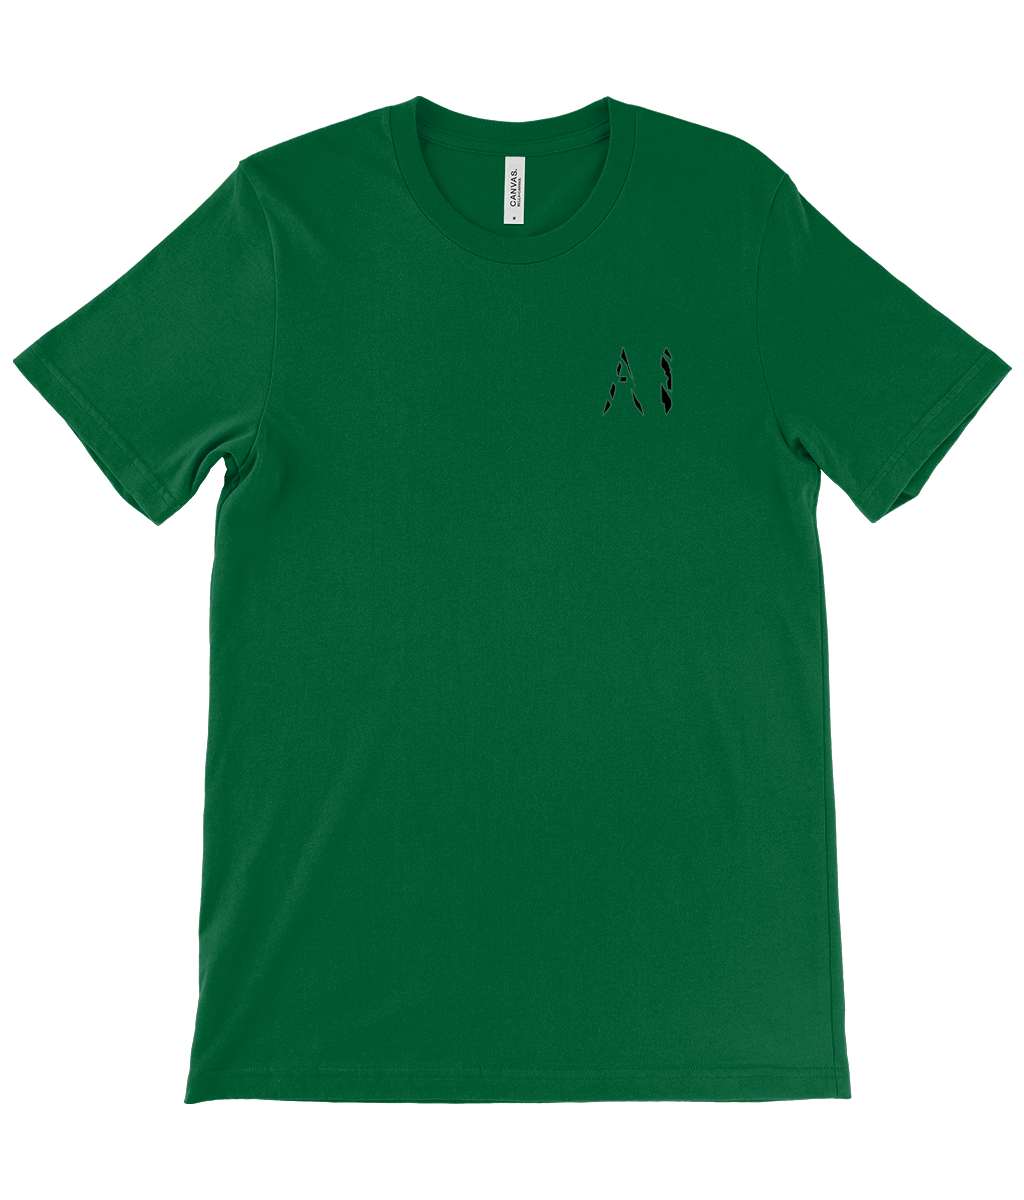 Mens dark green Casual T-Shirt with black AI logo on the left chest